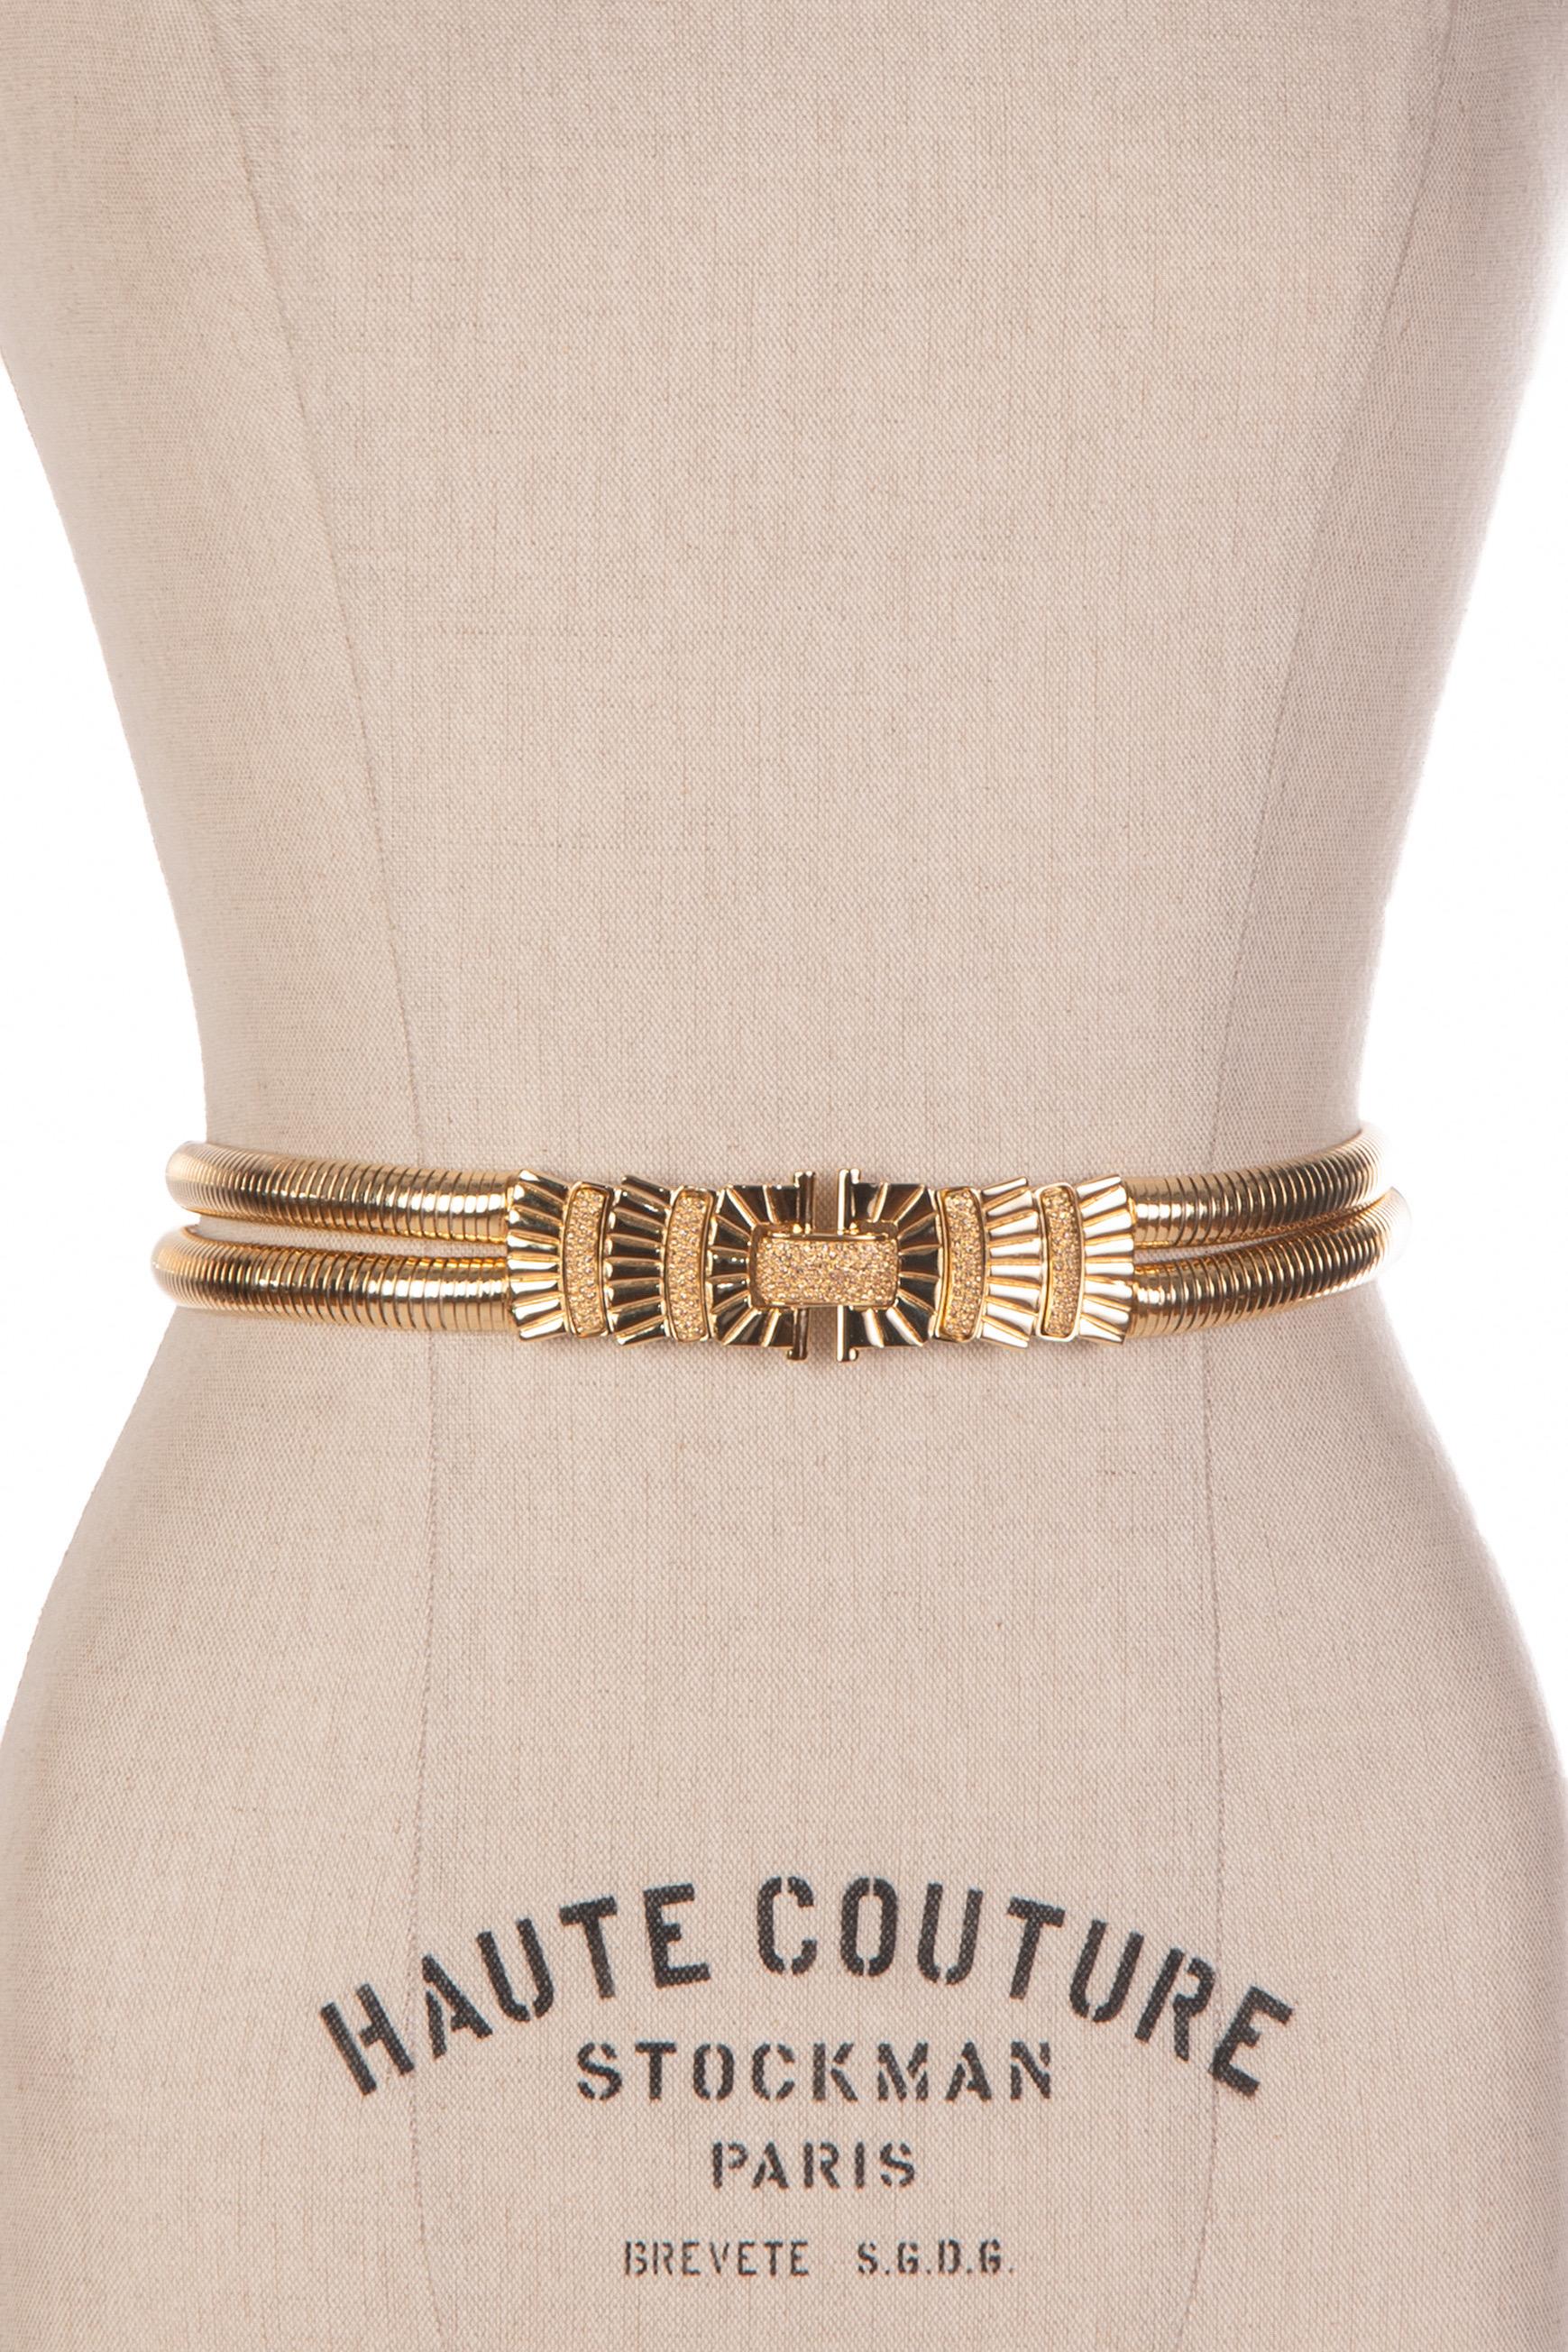 Synonymous with American luxury, Judith Leiber handbags and accessories are stylish, sophisticated and often whimsical.

This is an eye-catching and elegant signed and dated Judith Leiber gold tone double serpentine strap metal belt. The beautiful